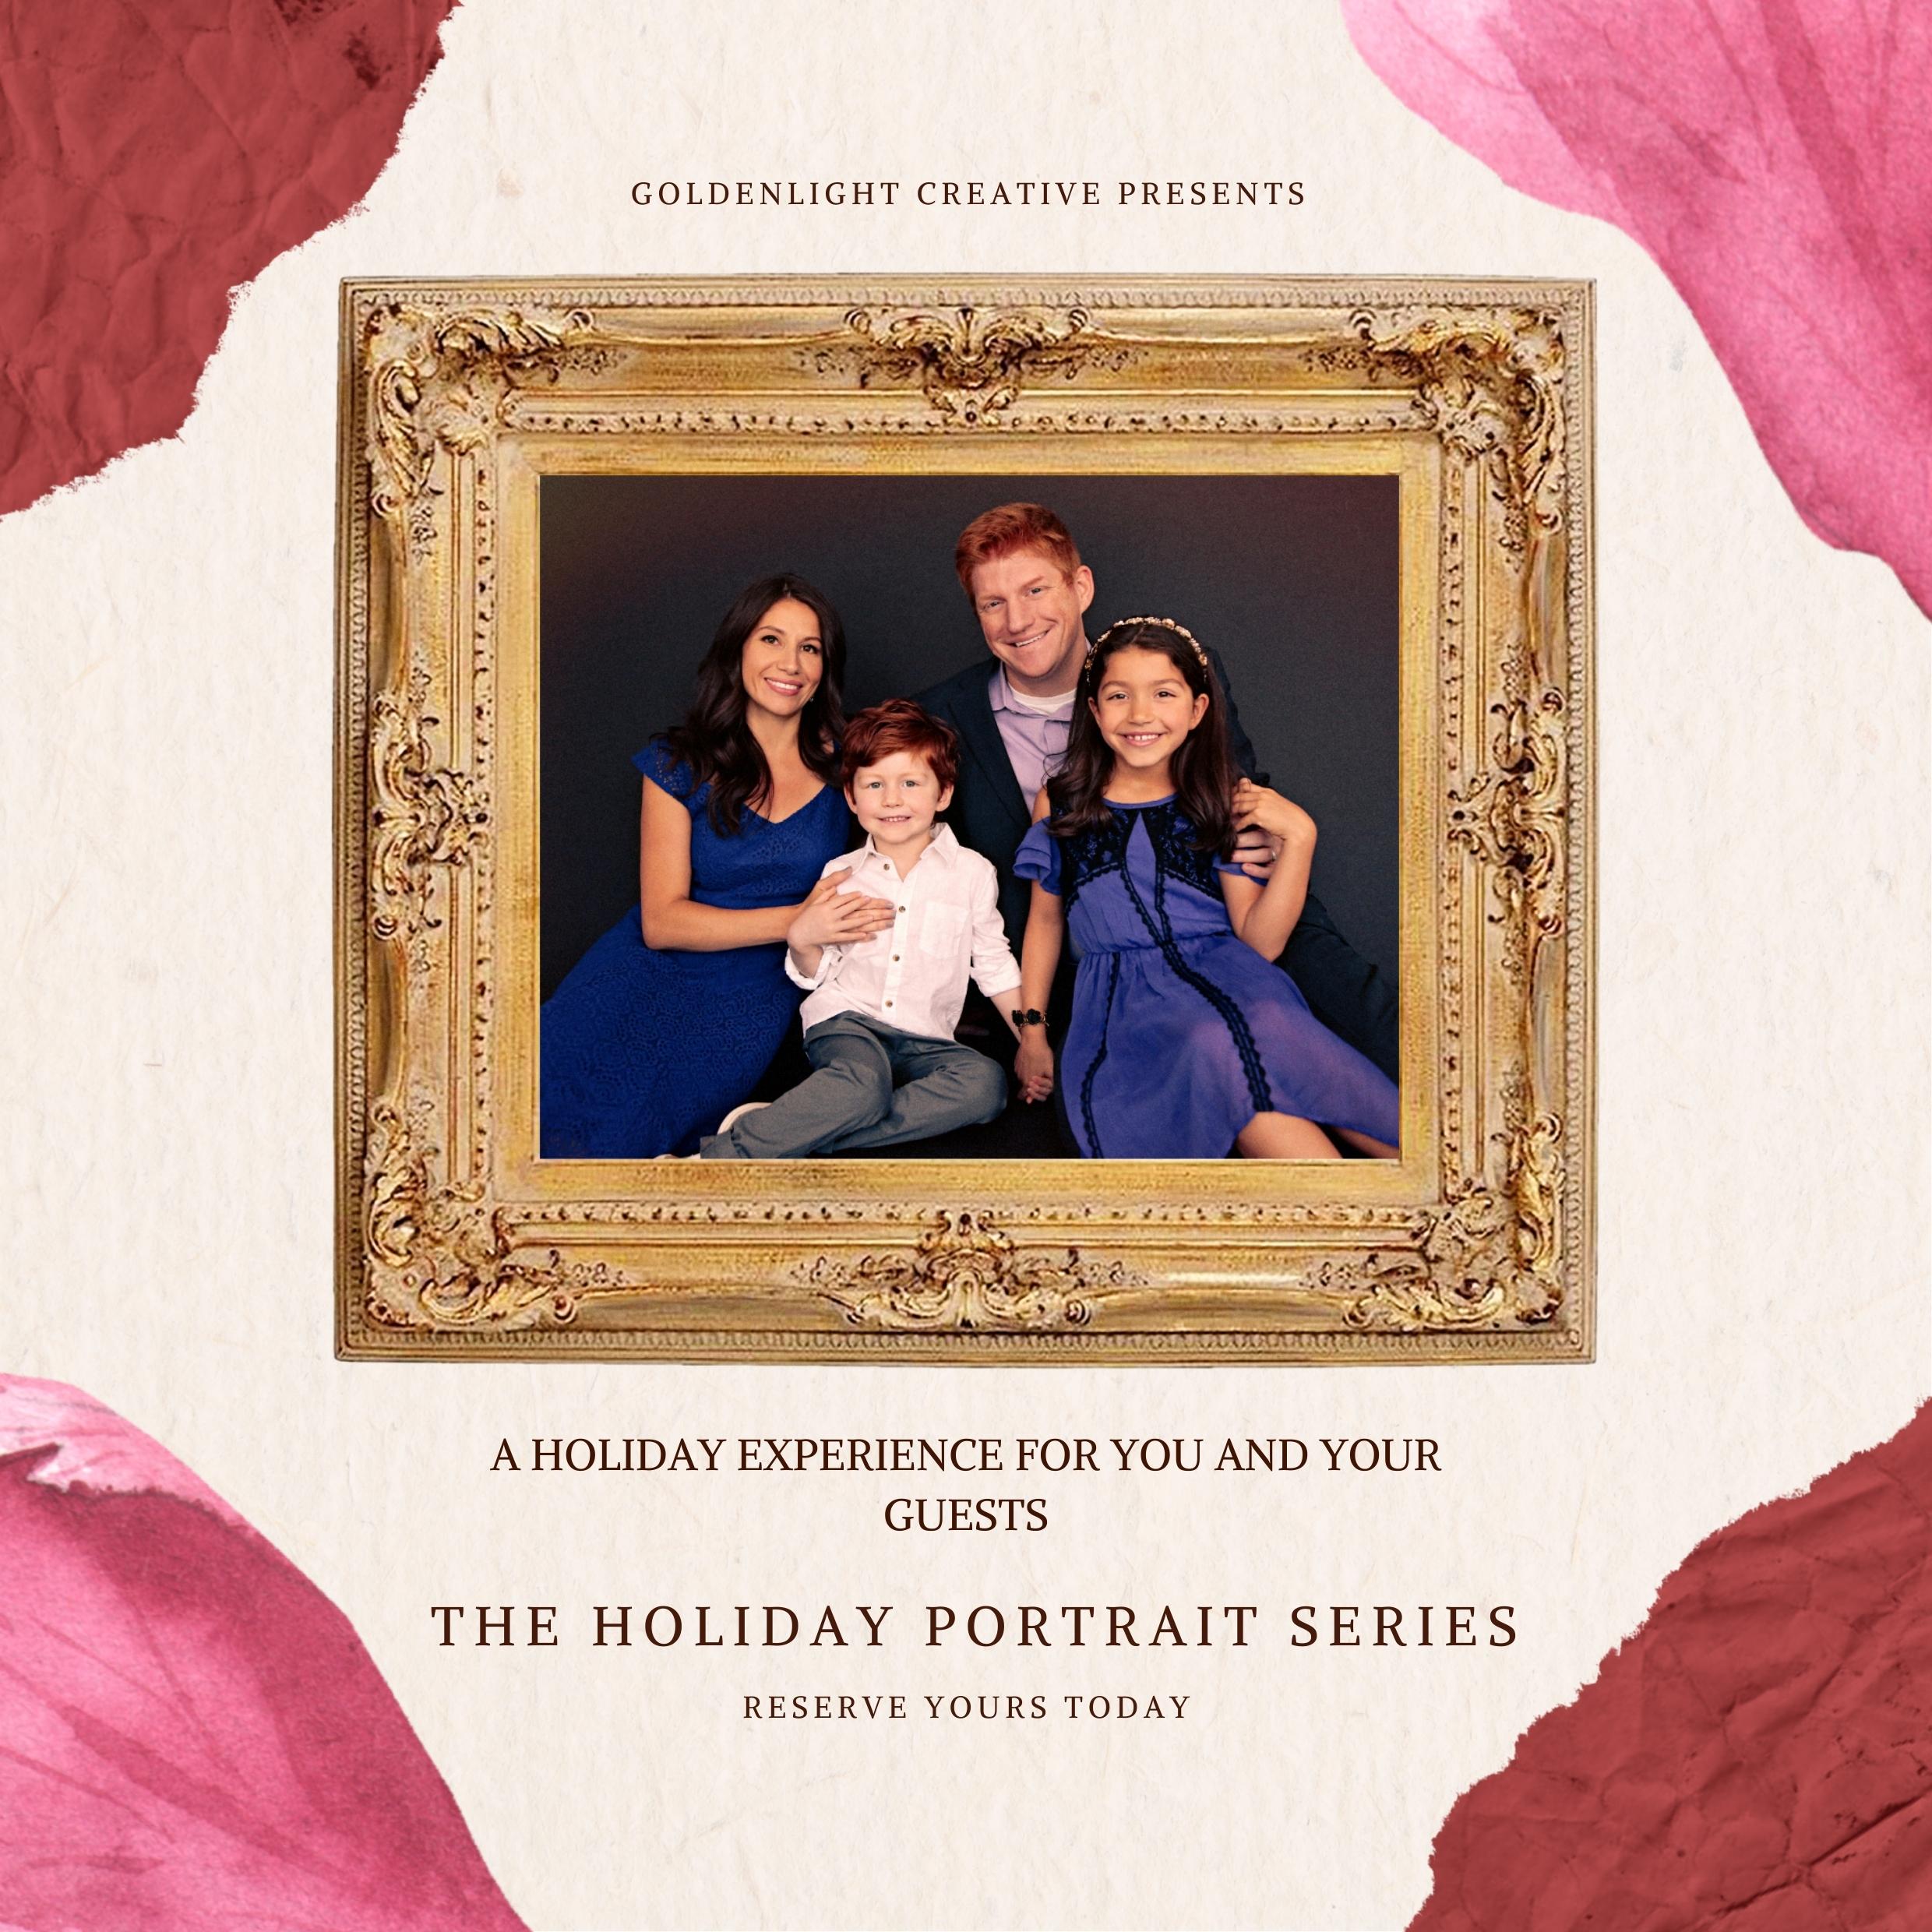 Graphic featuring a family of four. their portrait is framed in an ornate gold frame. Copy reads " Goldenlight Creative Presents: A holiday experience for you and your guests. The holiday portrait series. Reserve yours today".